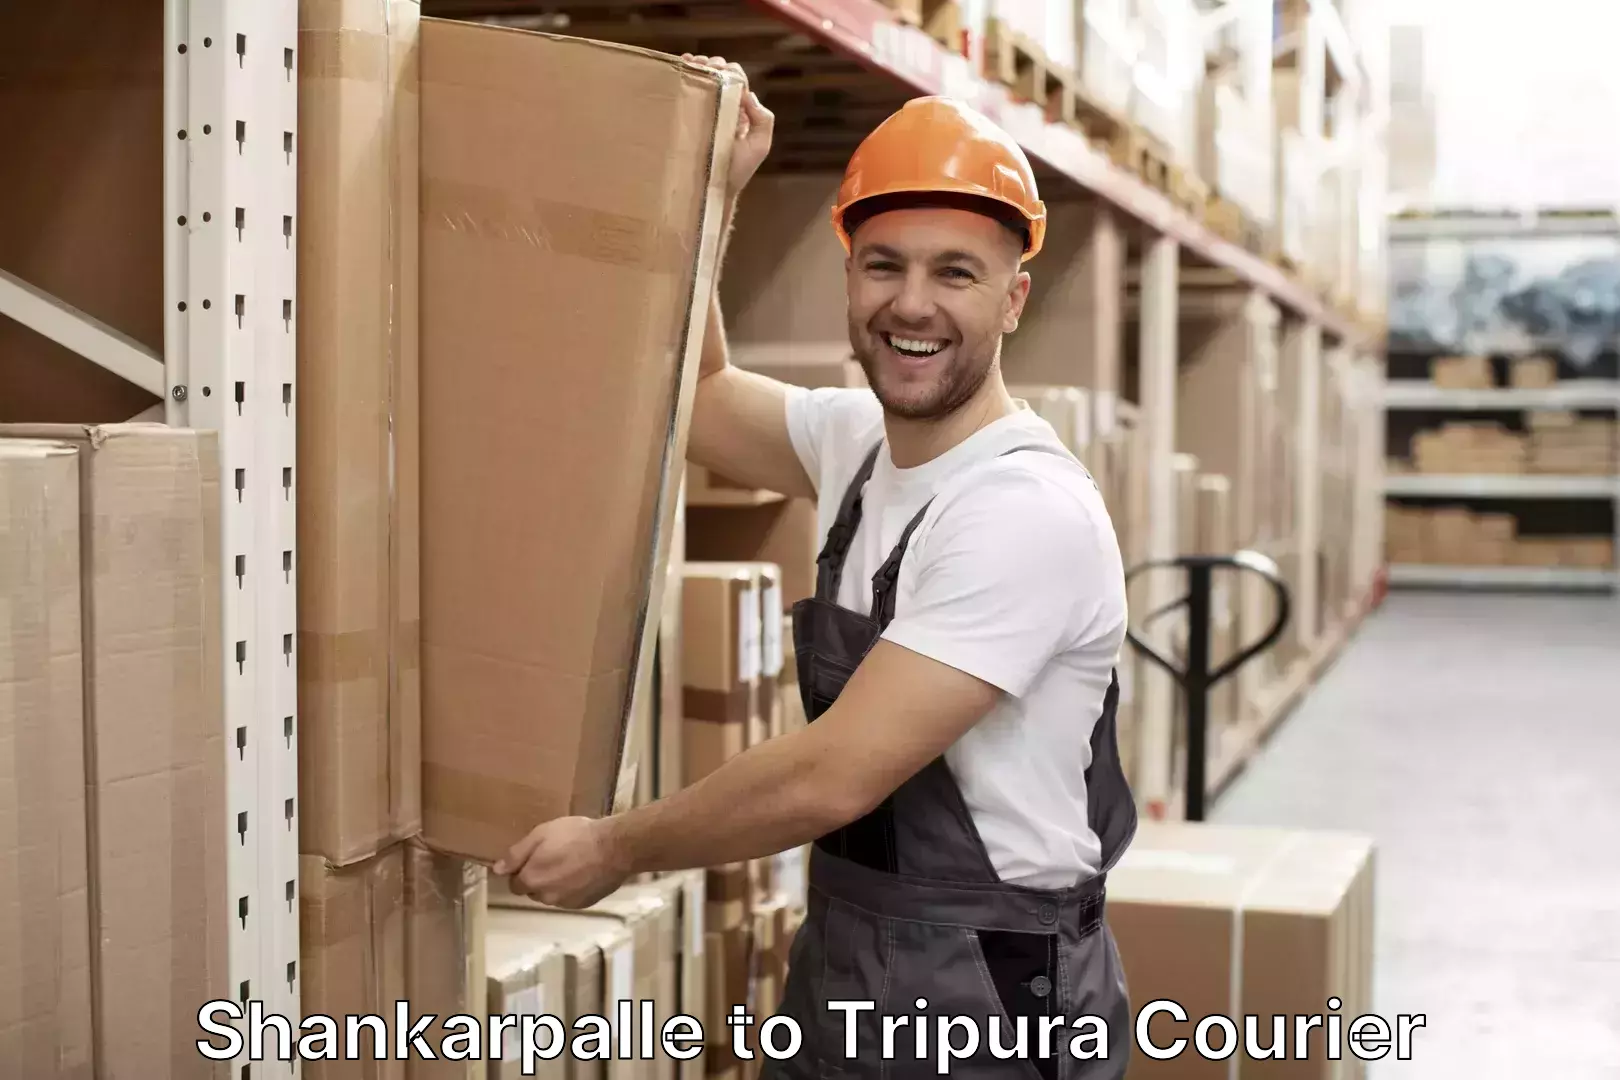 Luggage shipping trends Shankarpalle to Udaipur Tripura